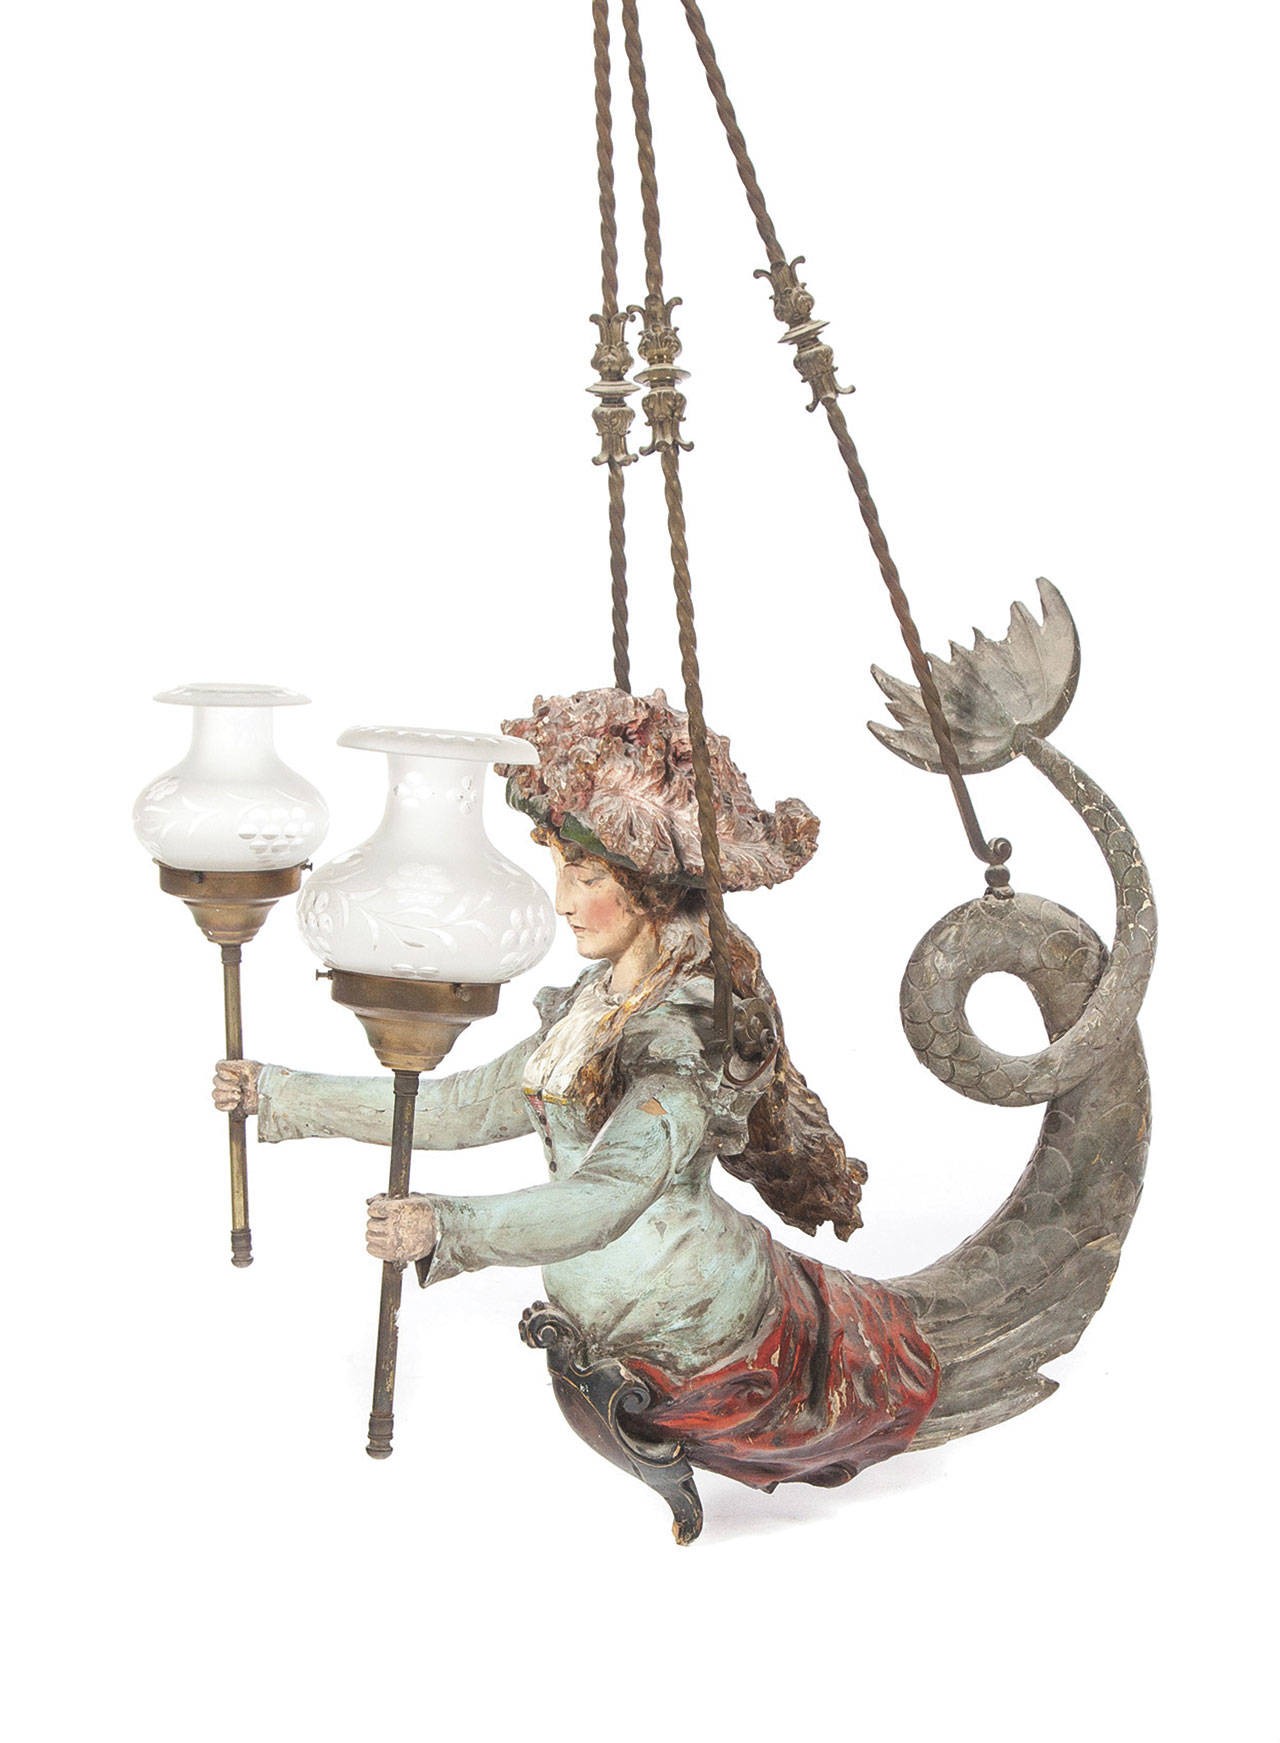 Carved mermaid on hanging lamp fully clothed in 1900s